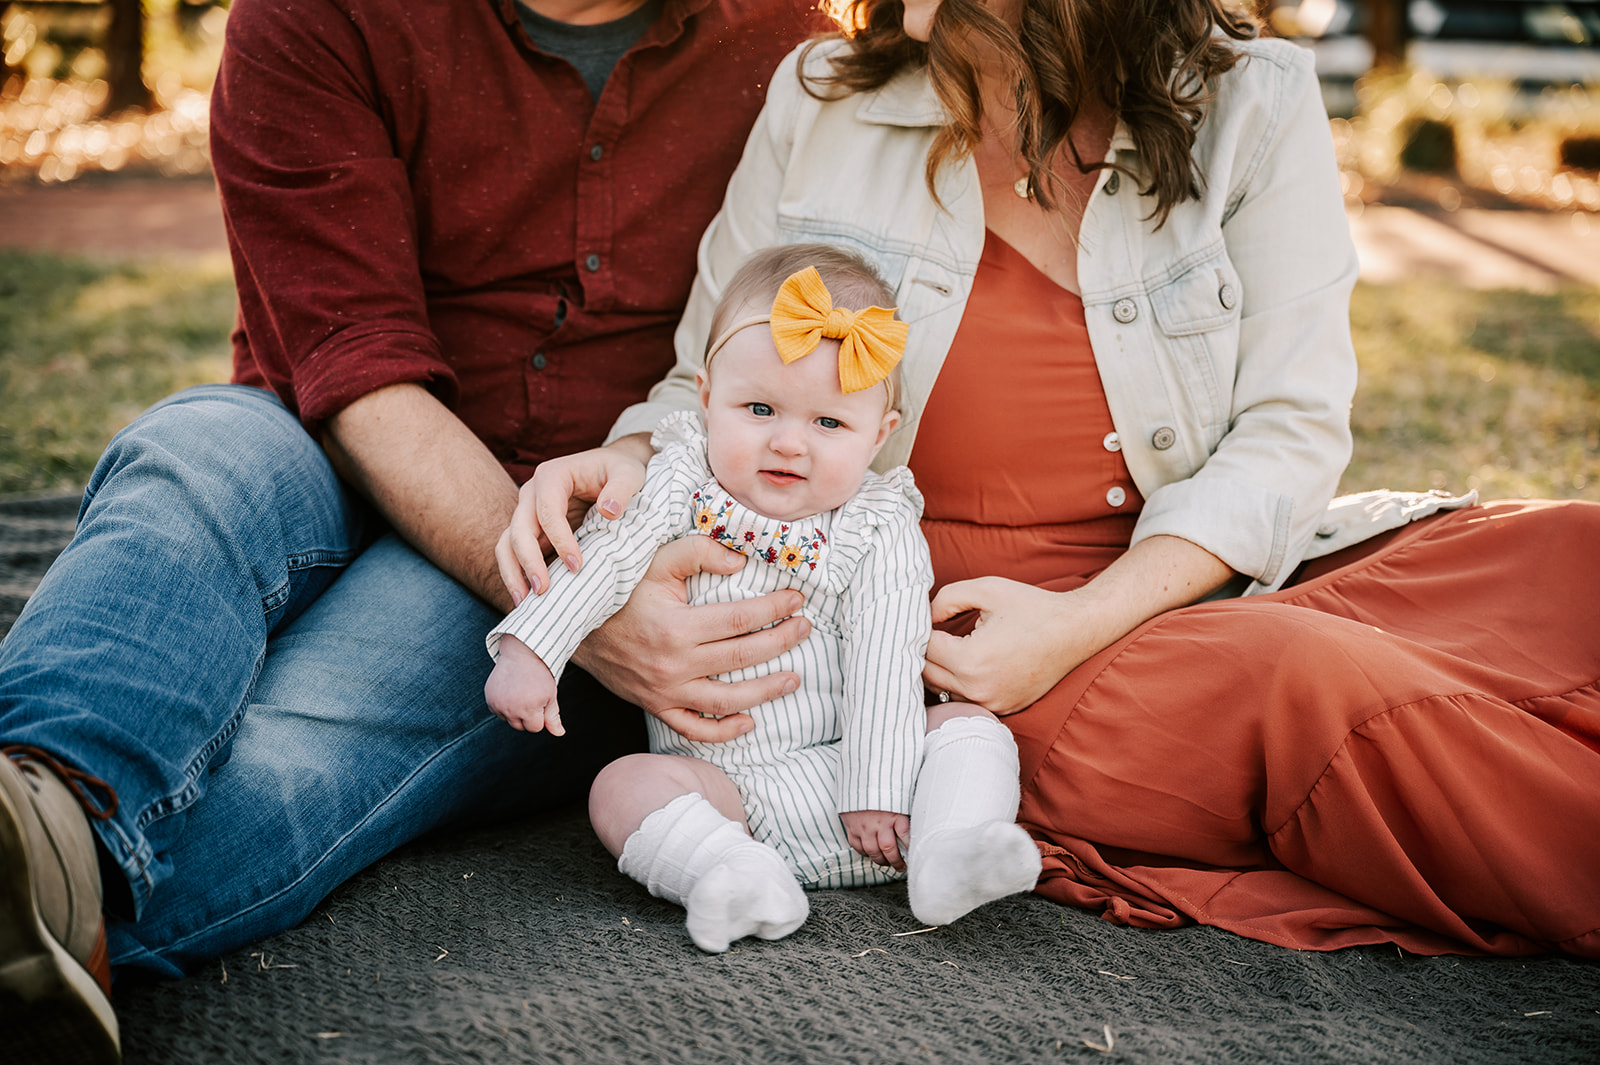 An infant girl in a white striped onesie and yellow boy sits on a blanket with mom and dad in a park at sunset